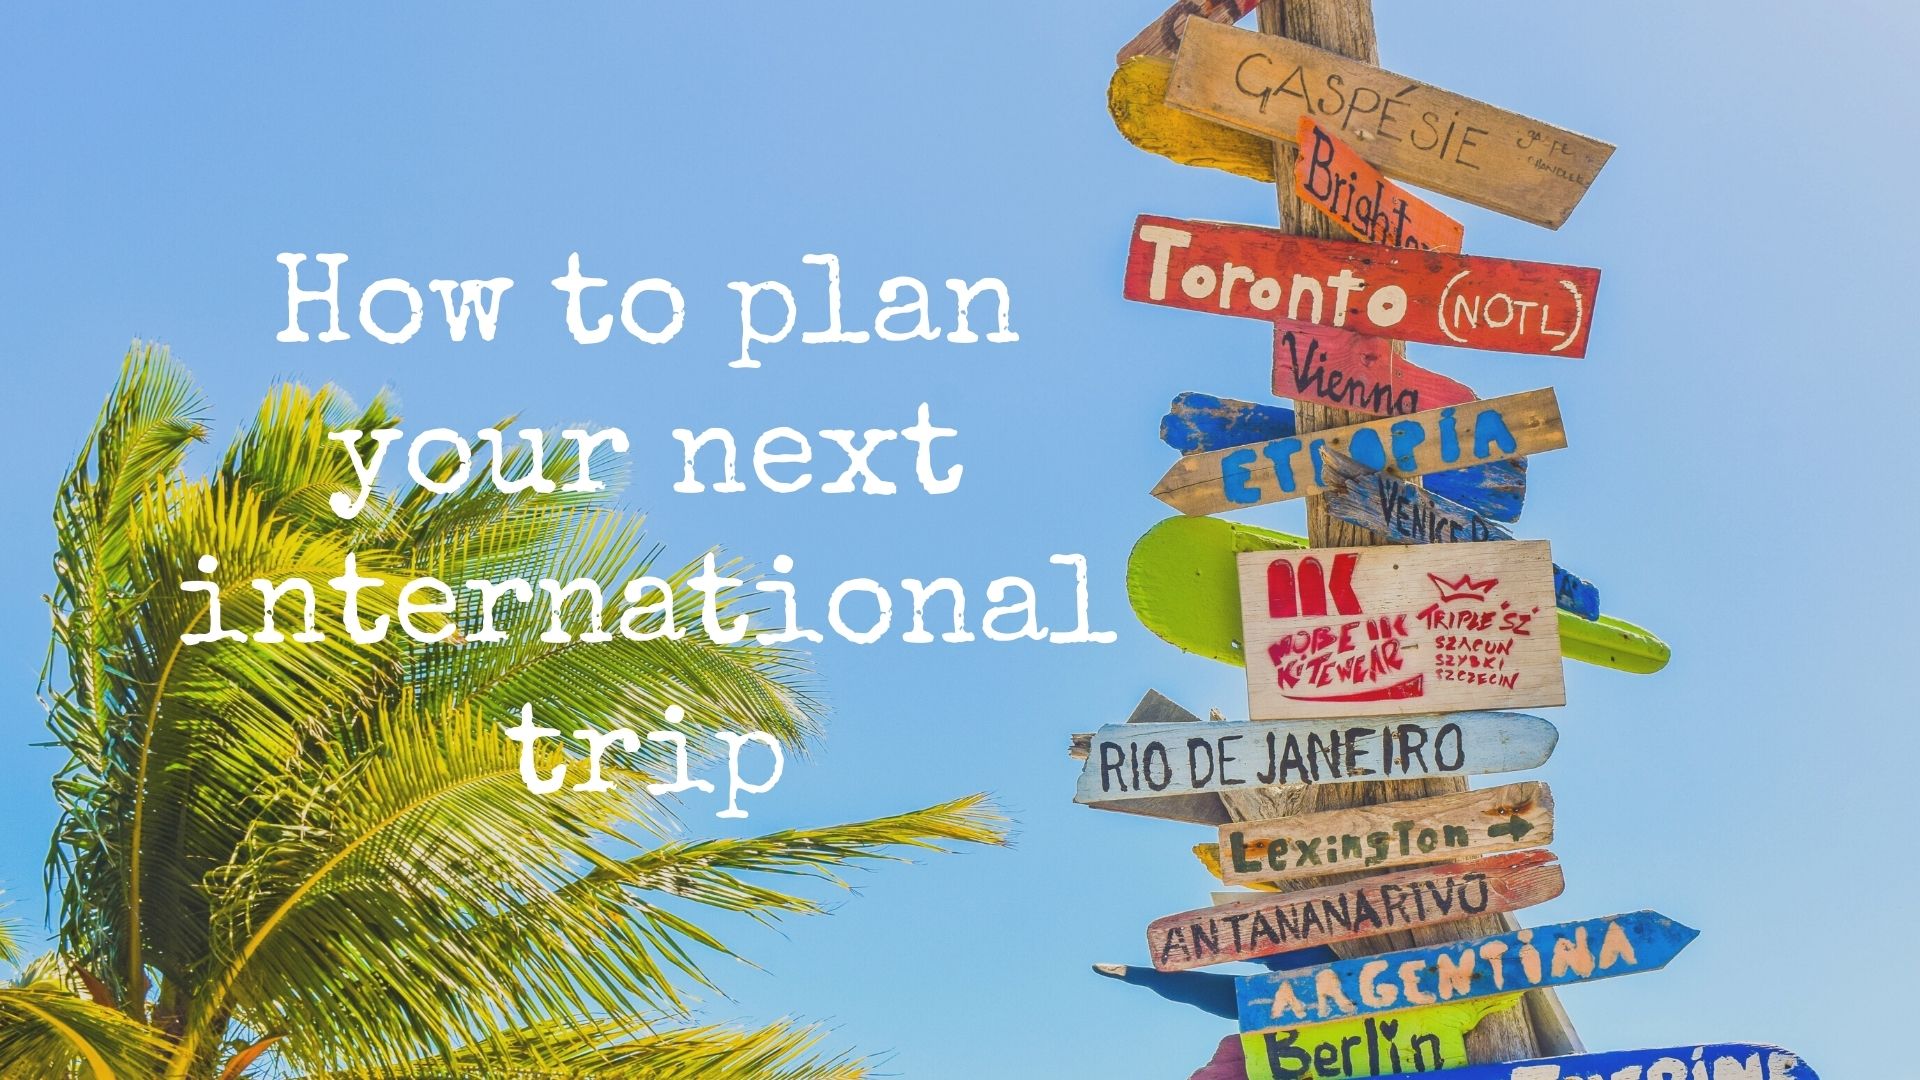 How to plan for your next international trip, travel planning your next overseas travel, travel planning from start to finish, how to plan your international one week travel